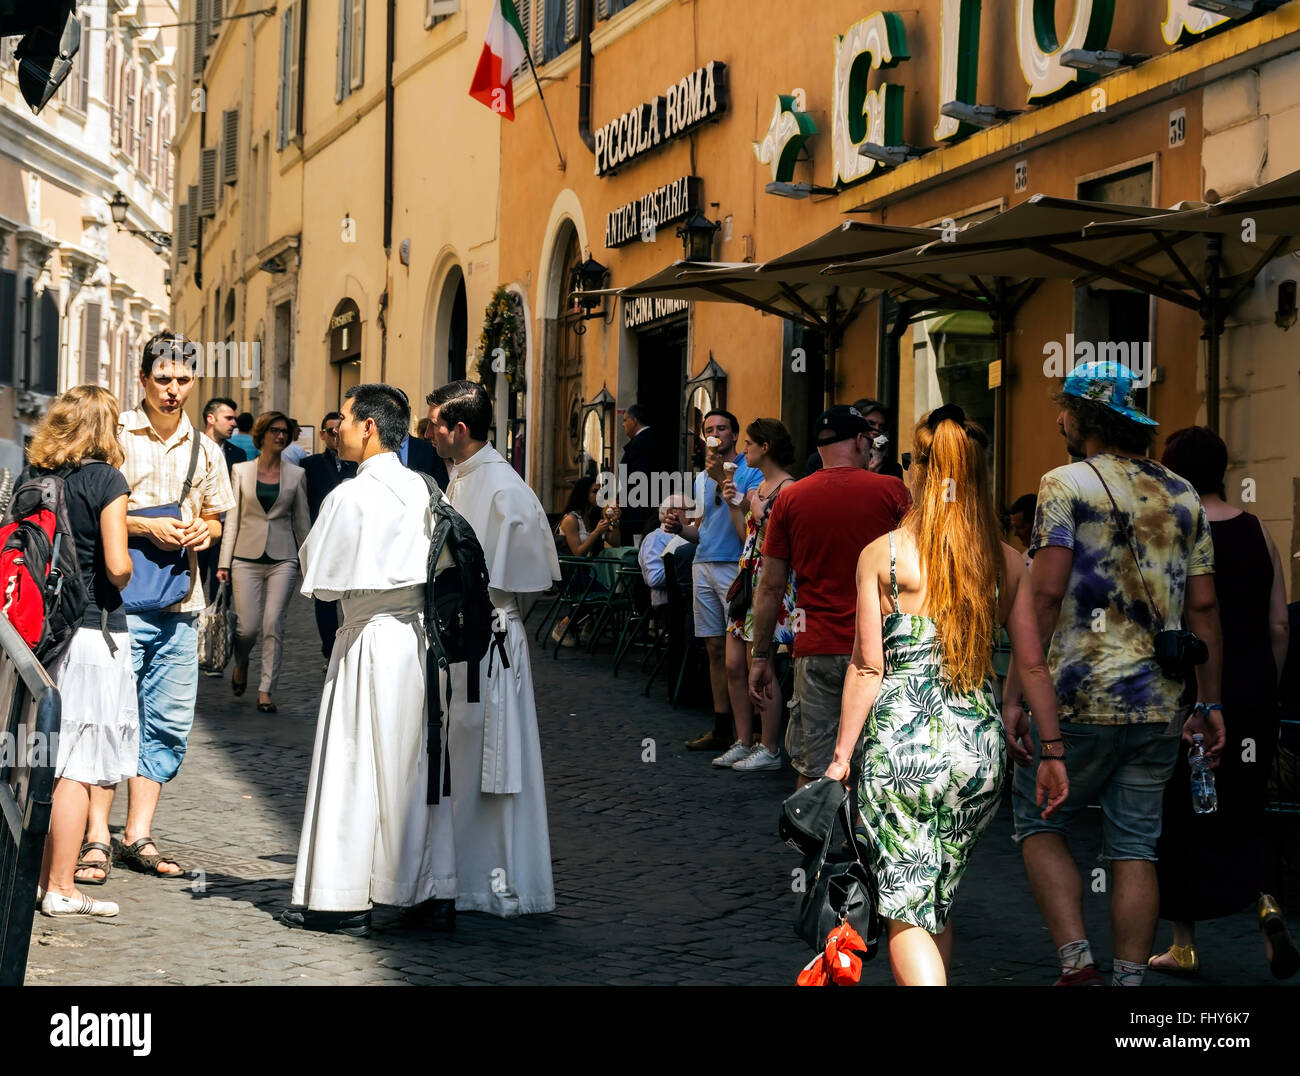 Visitors and locals gathered around the famous Giolitti ice cream shop and cafe in Rome. Stock Photo